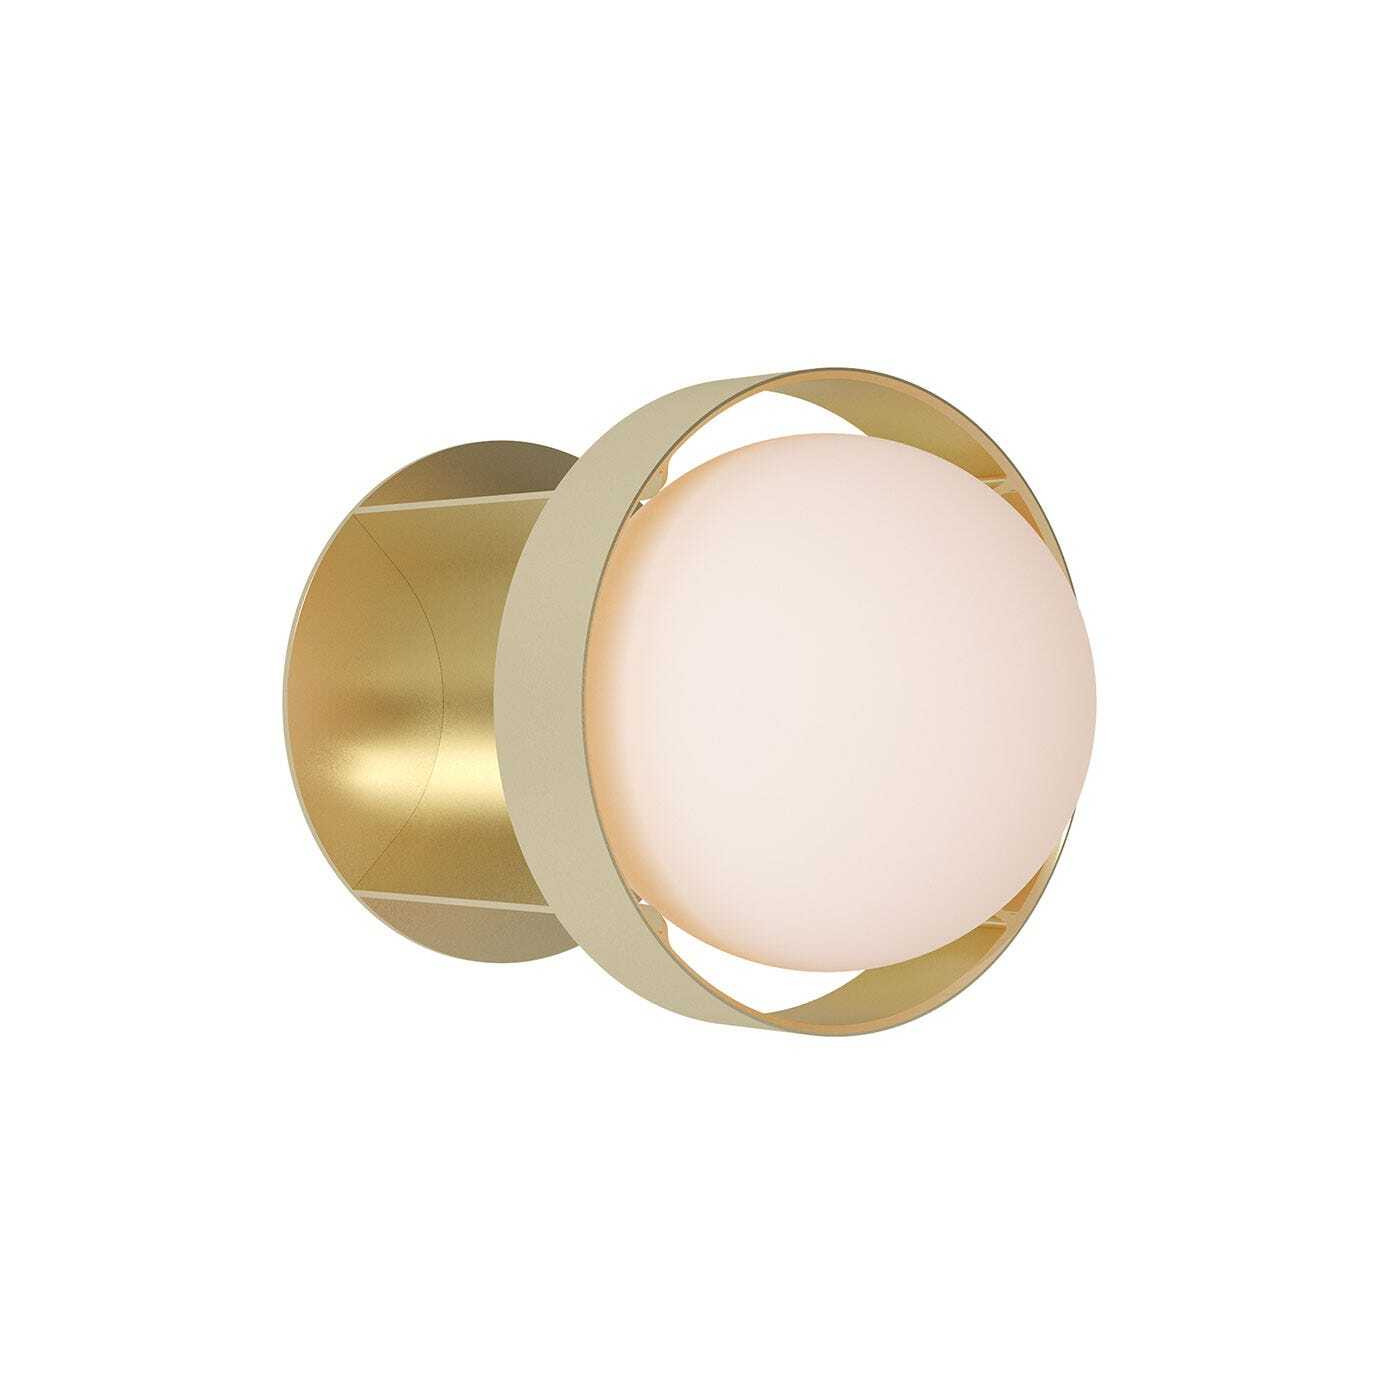 Tala Loop Wall Light Gold Large with Sphere IV Bulb - image 1